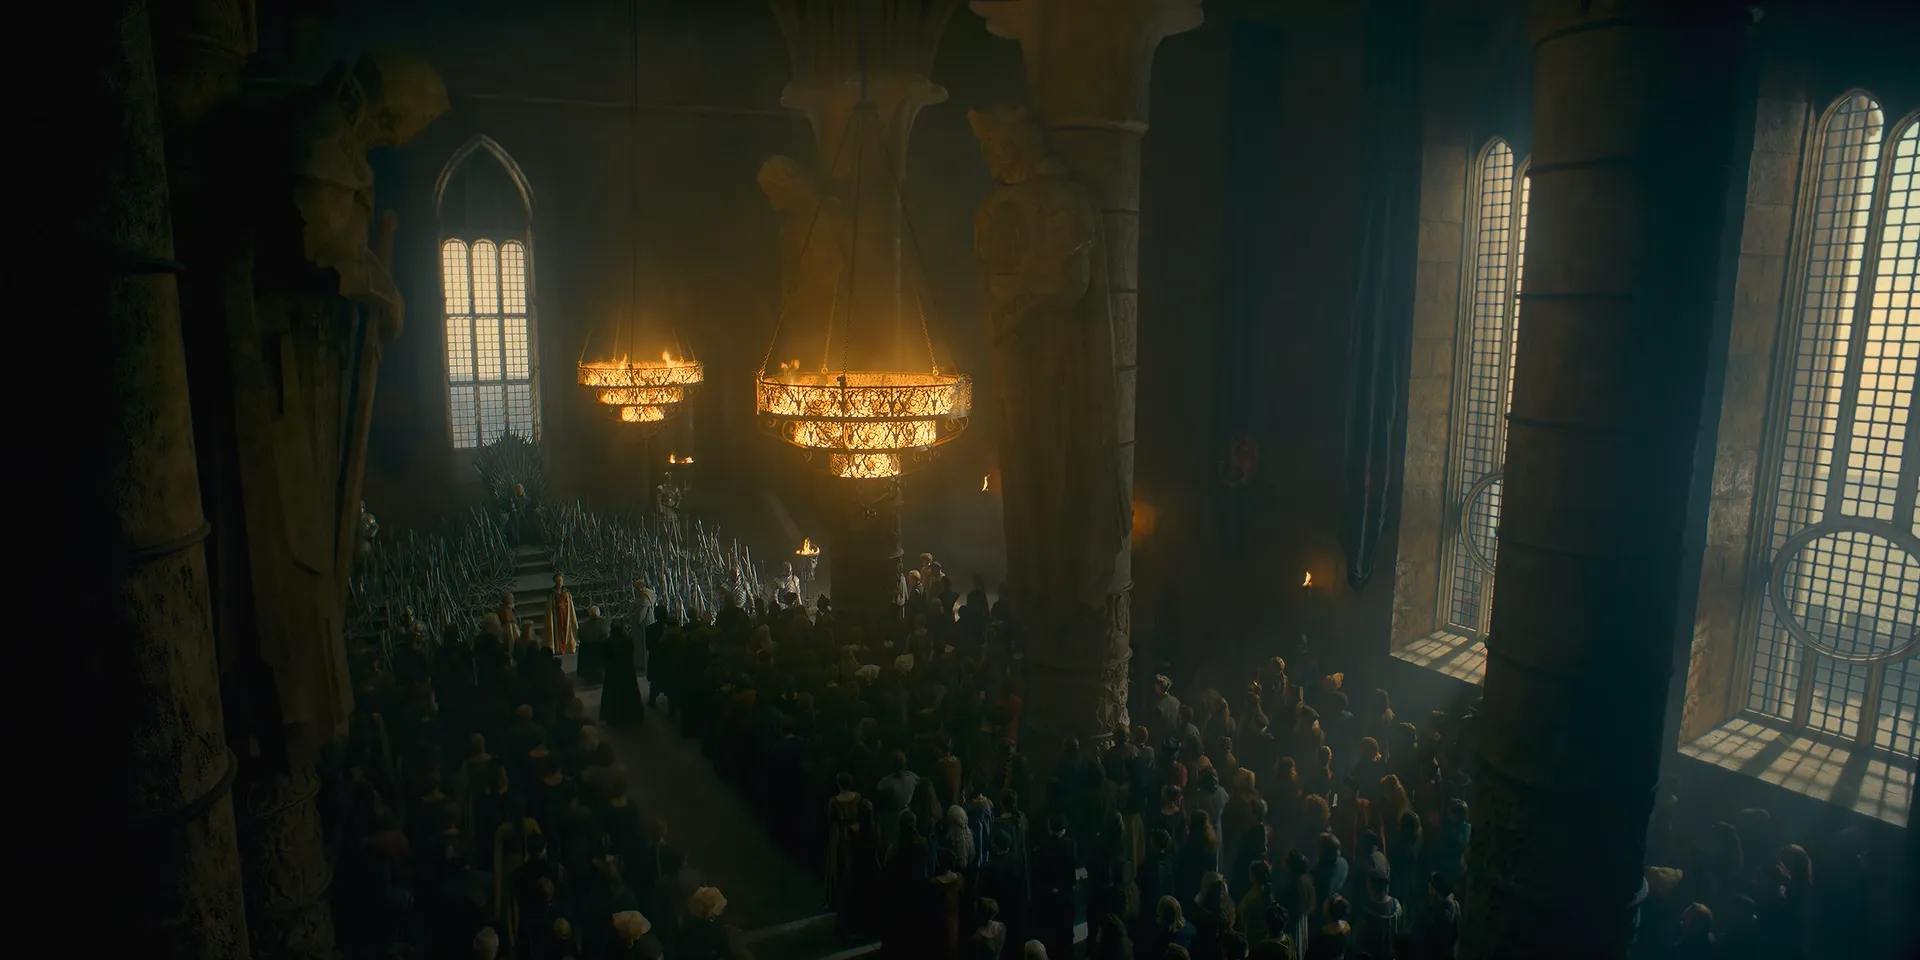 The Great Hall at Kings Landing - House of the Dragon